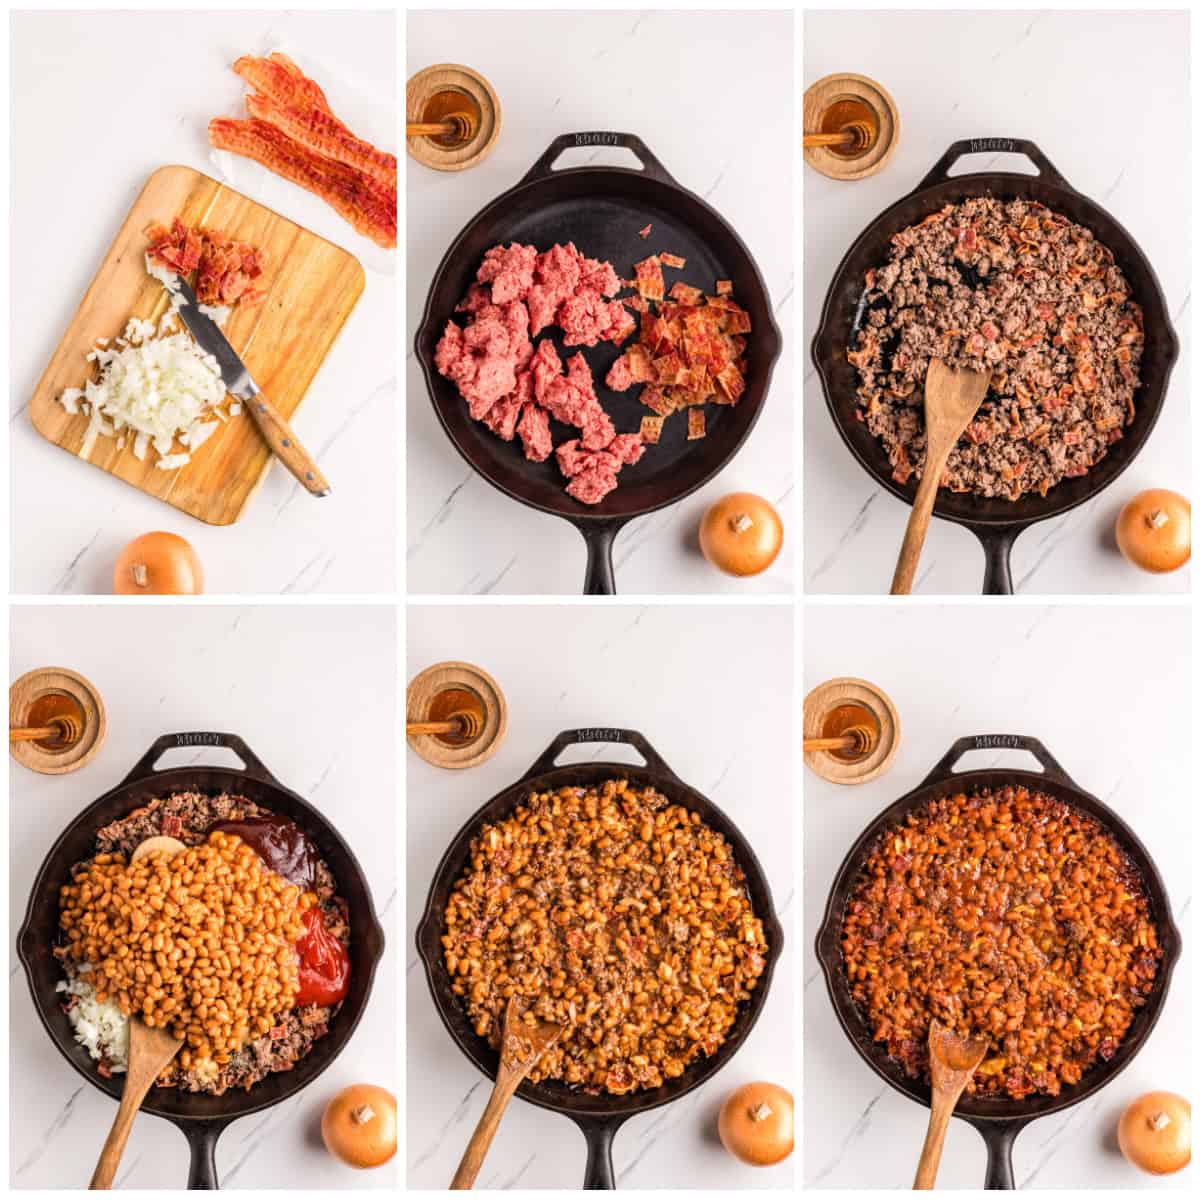 Step by step photos on how to make Baked Beans with Ground Beef.